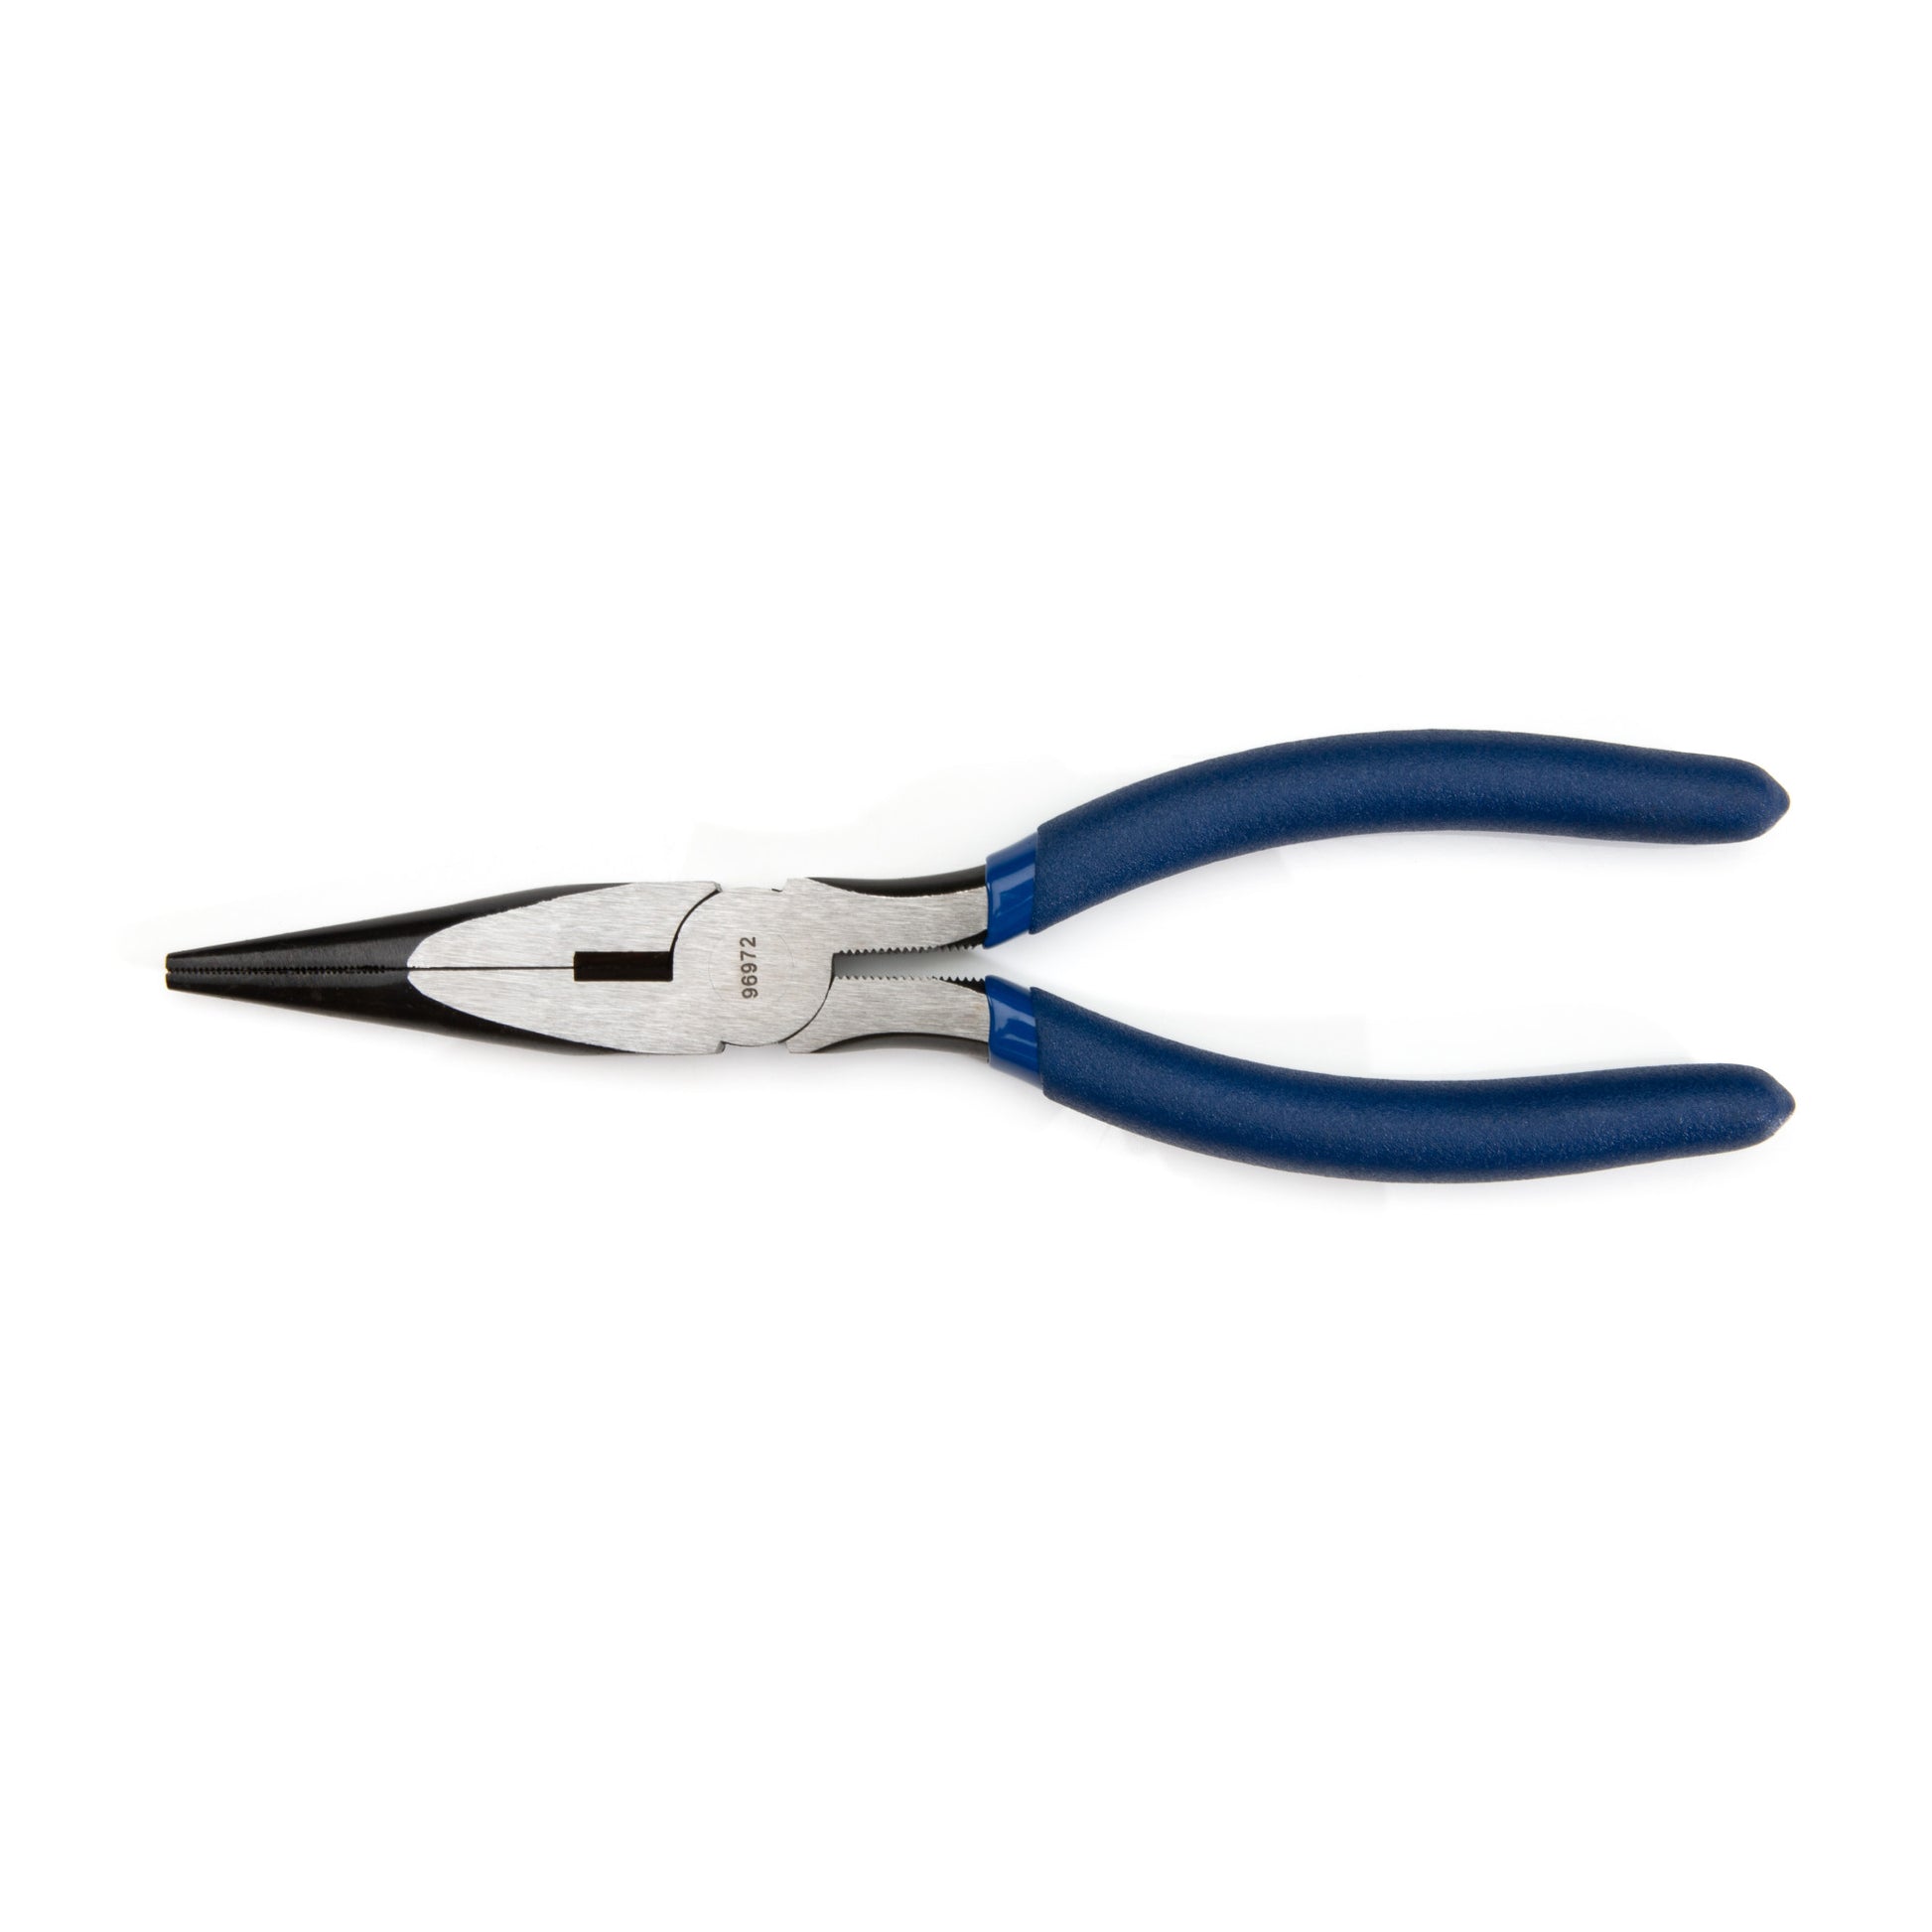 Steelman 8-Inch Long Slip-Joint Pliers with Wire Cutter and Dual Layer Black Grip